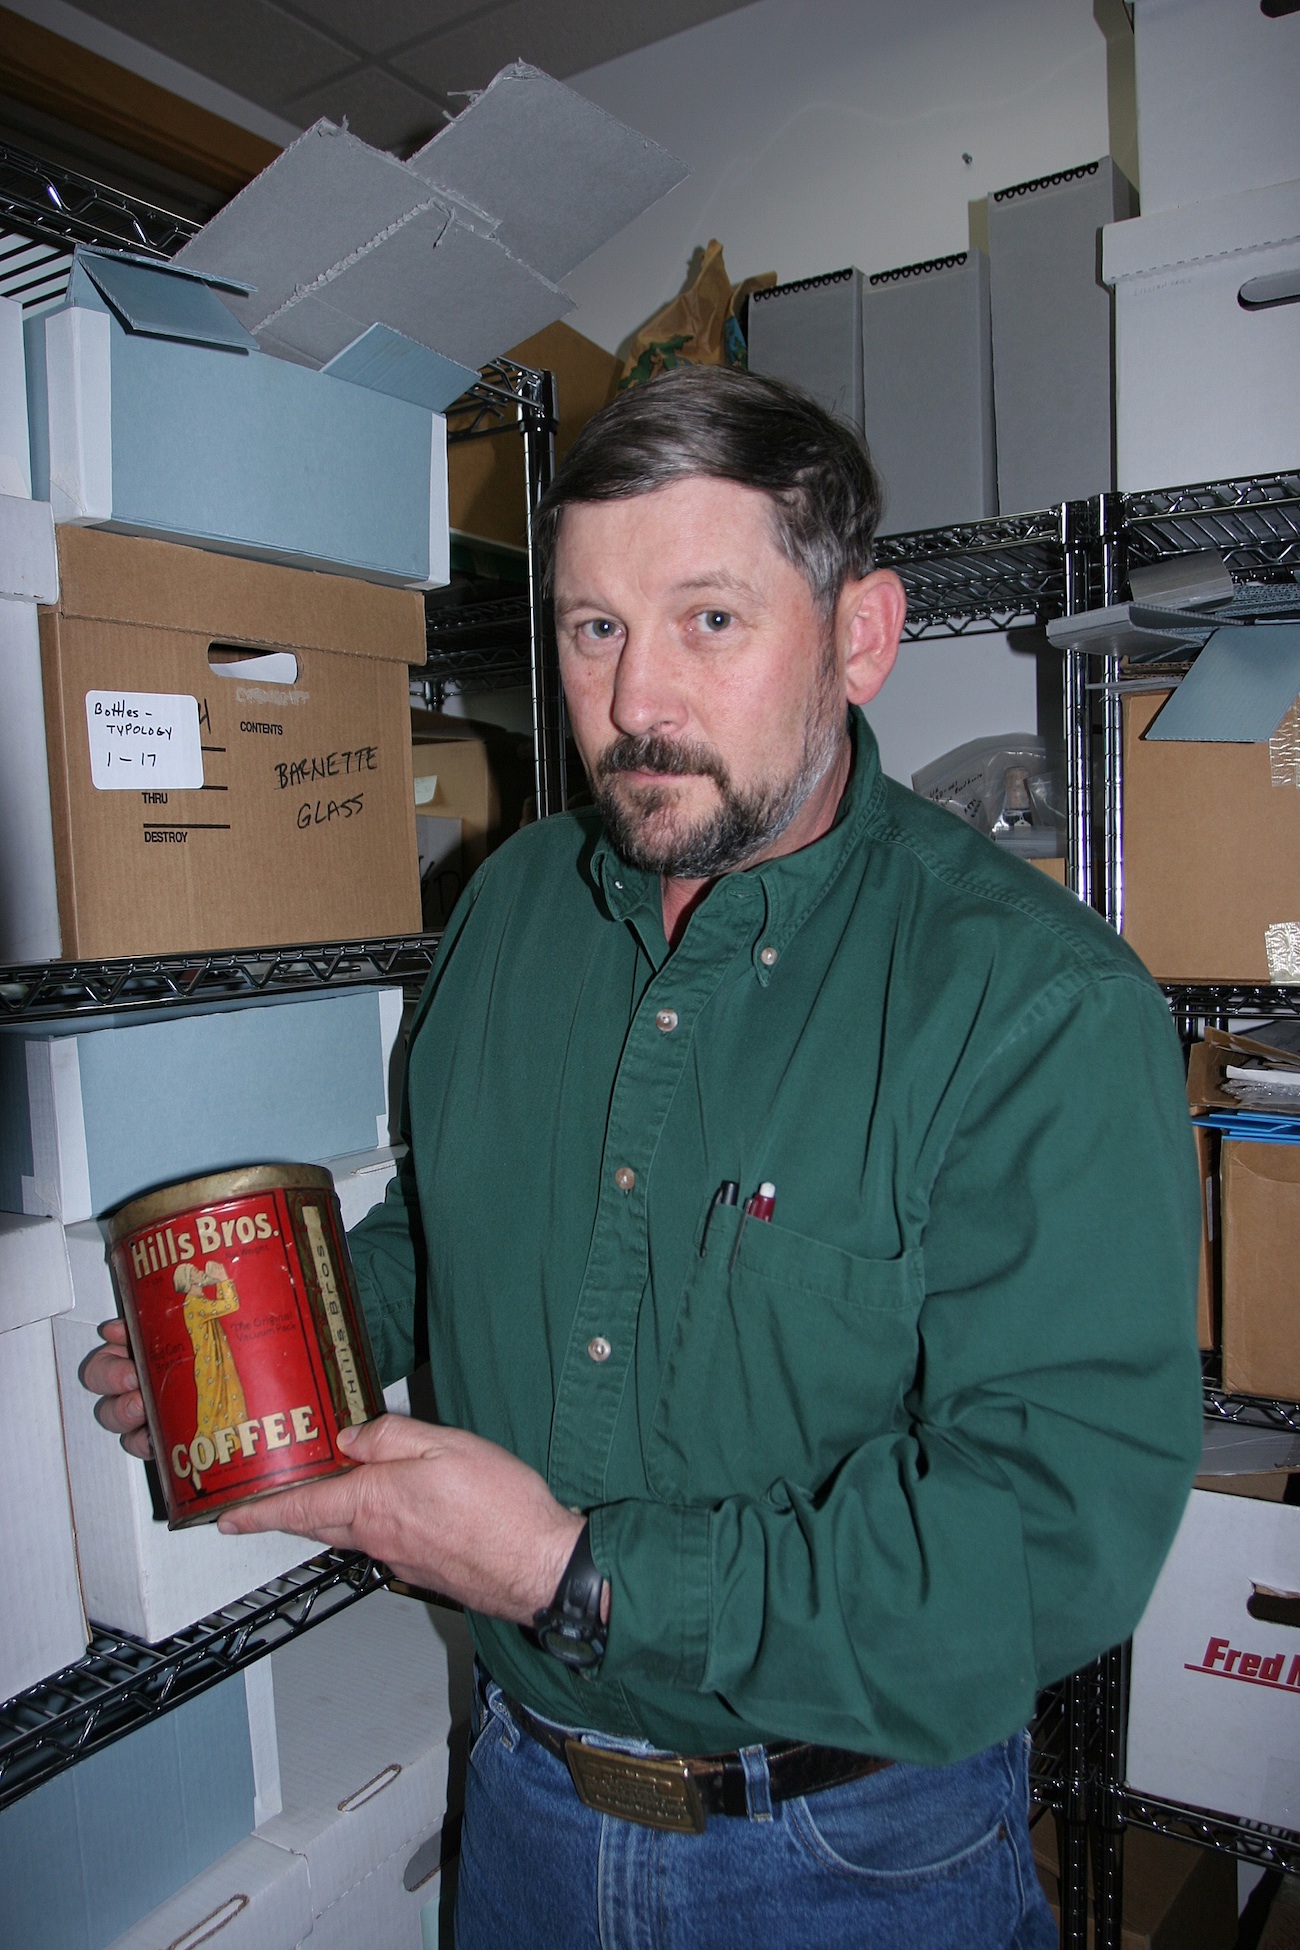 A bearded man in a green shirt holds a red coffee can.